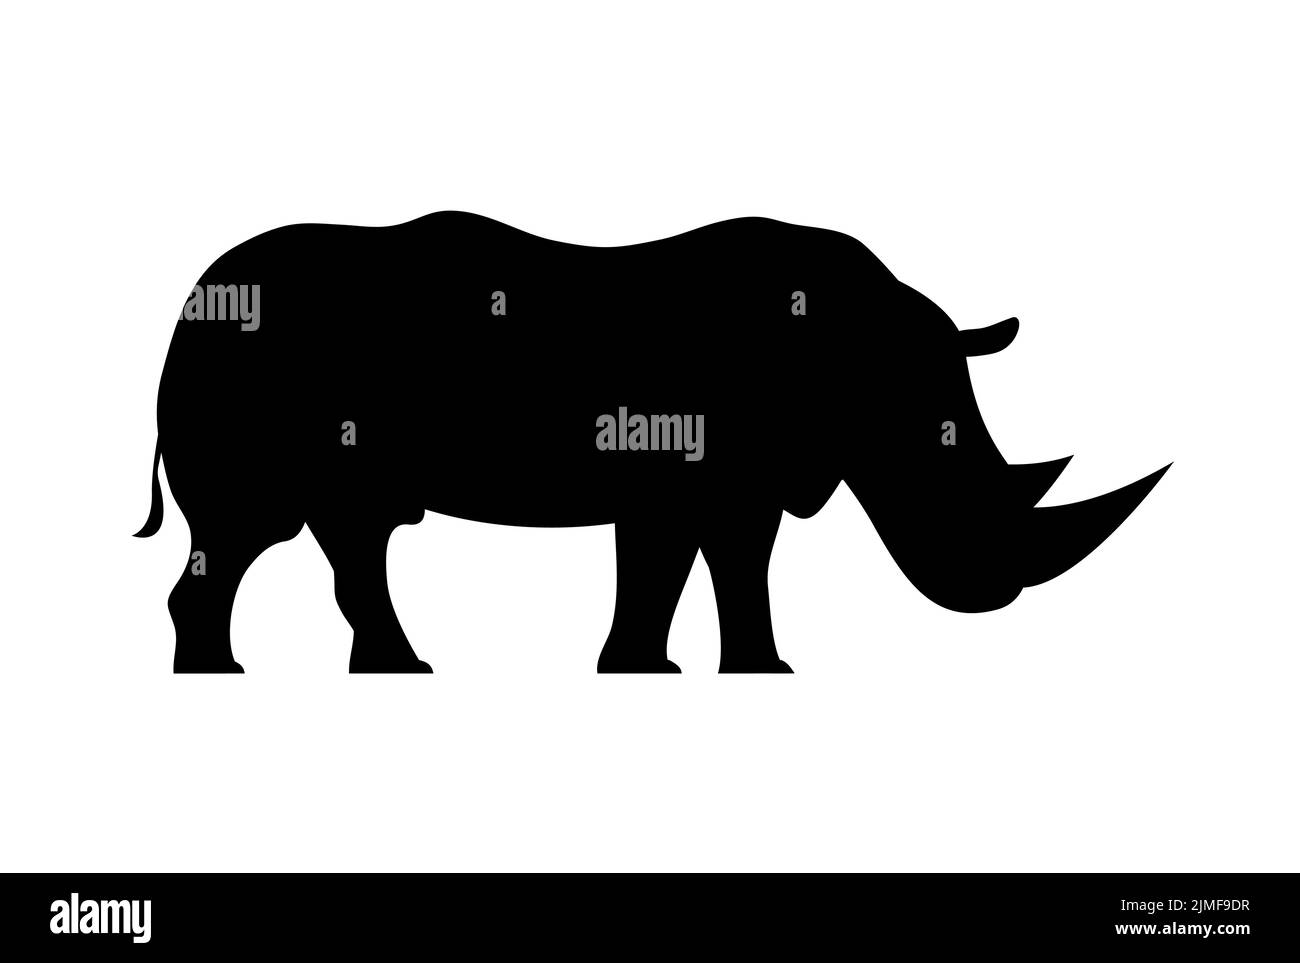 African animal rhinoceros. Black silhouette. Large herbivorous mammal with a horn. Fauna, safari and zoology. Design template for label, sign, logo. V Stock Vector